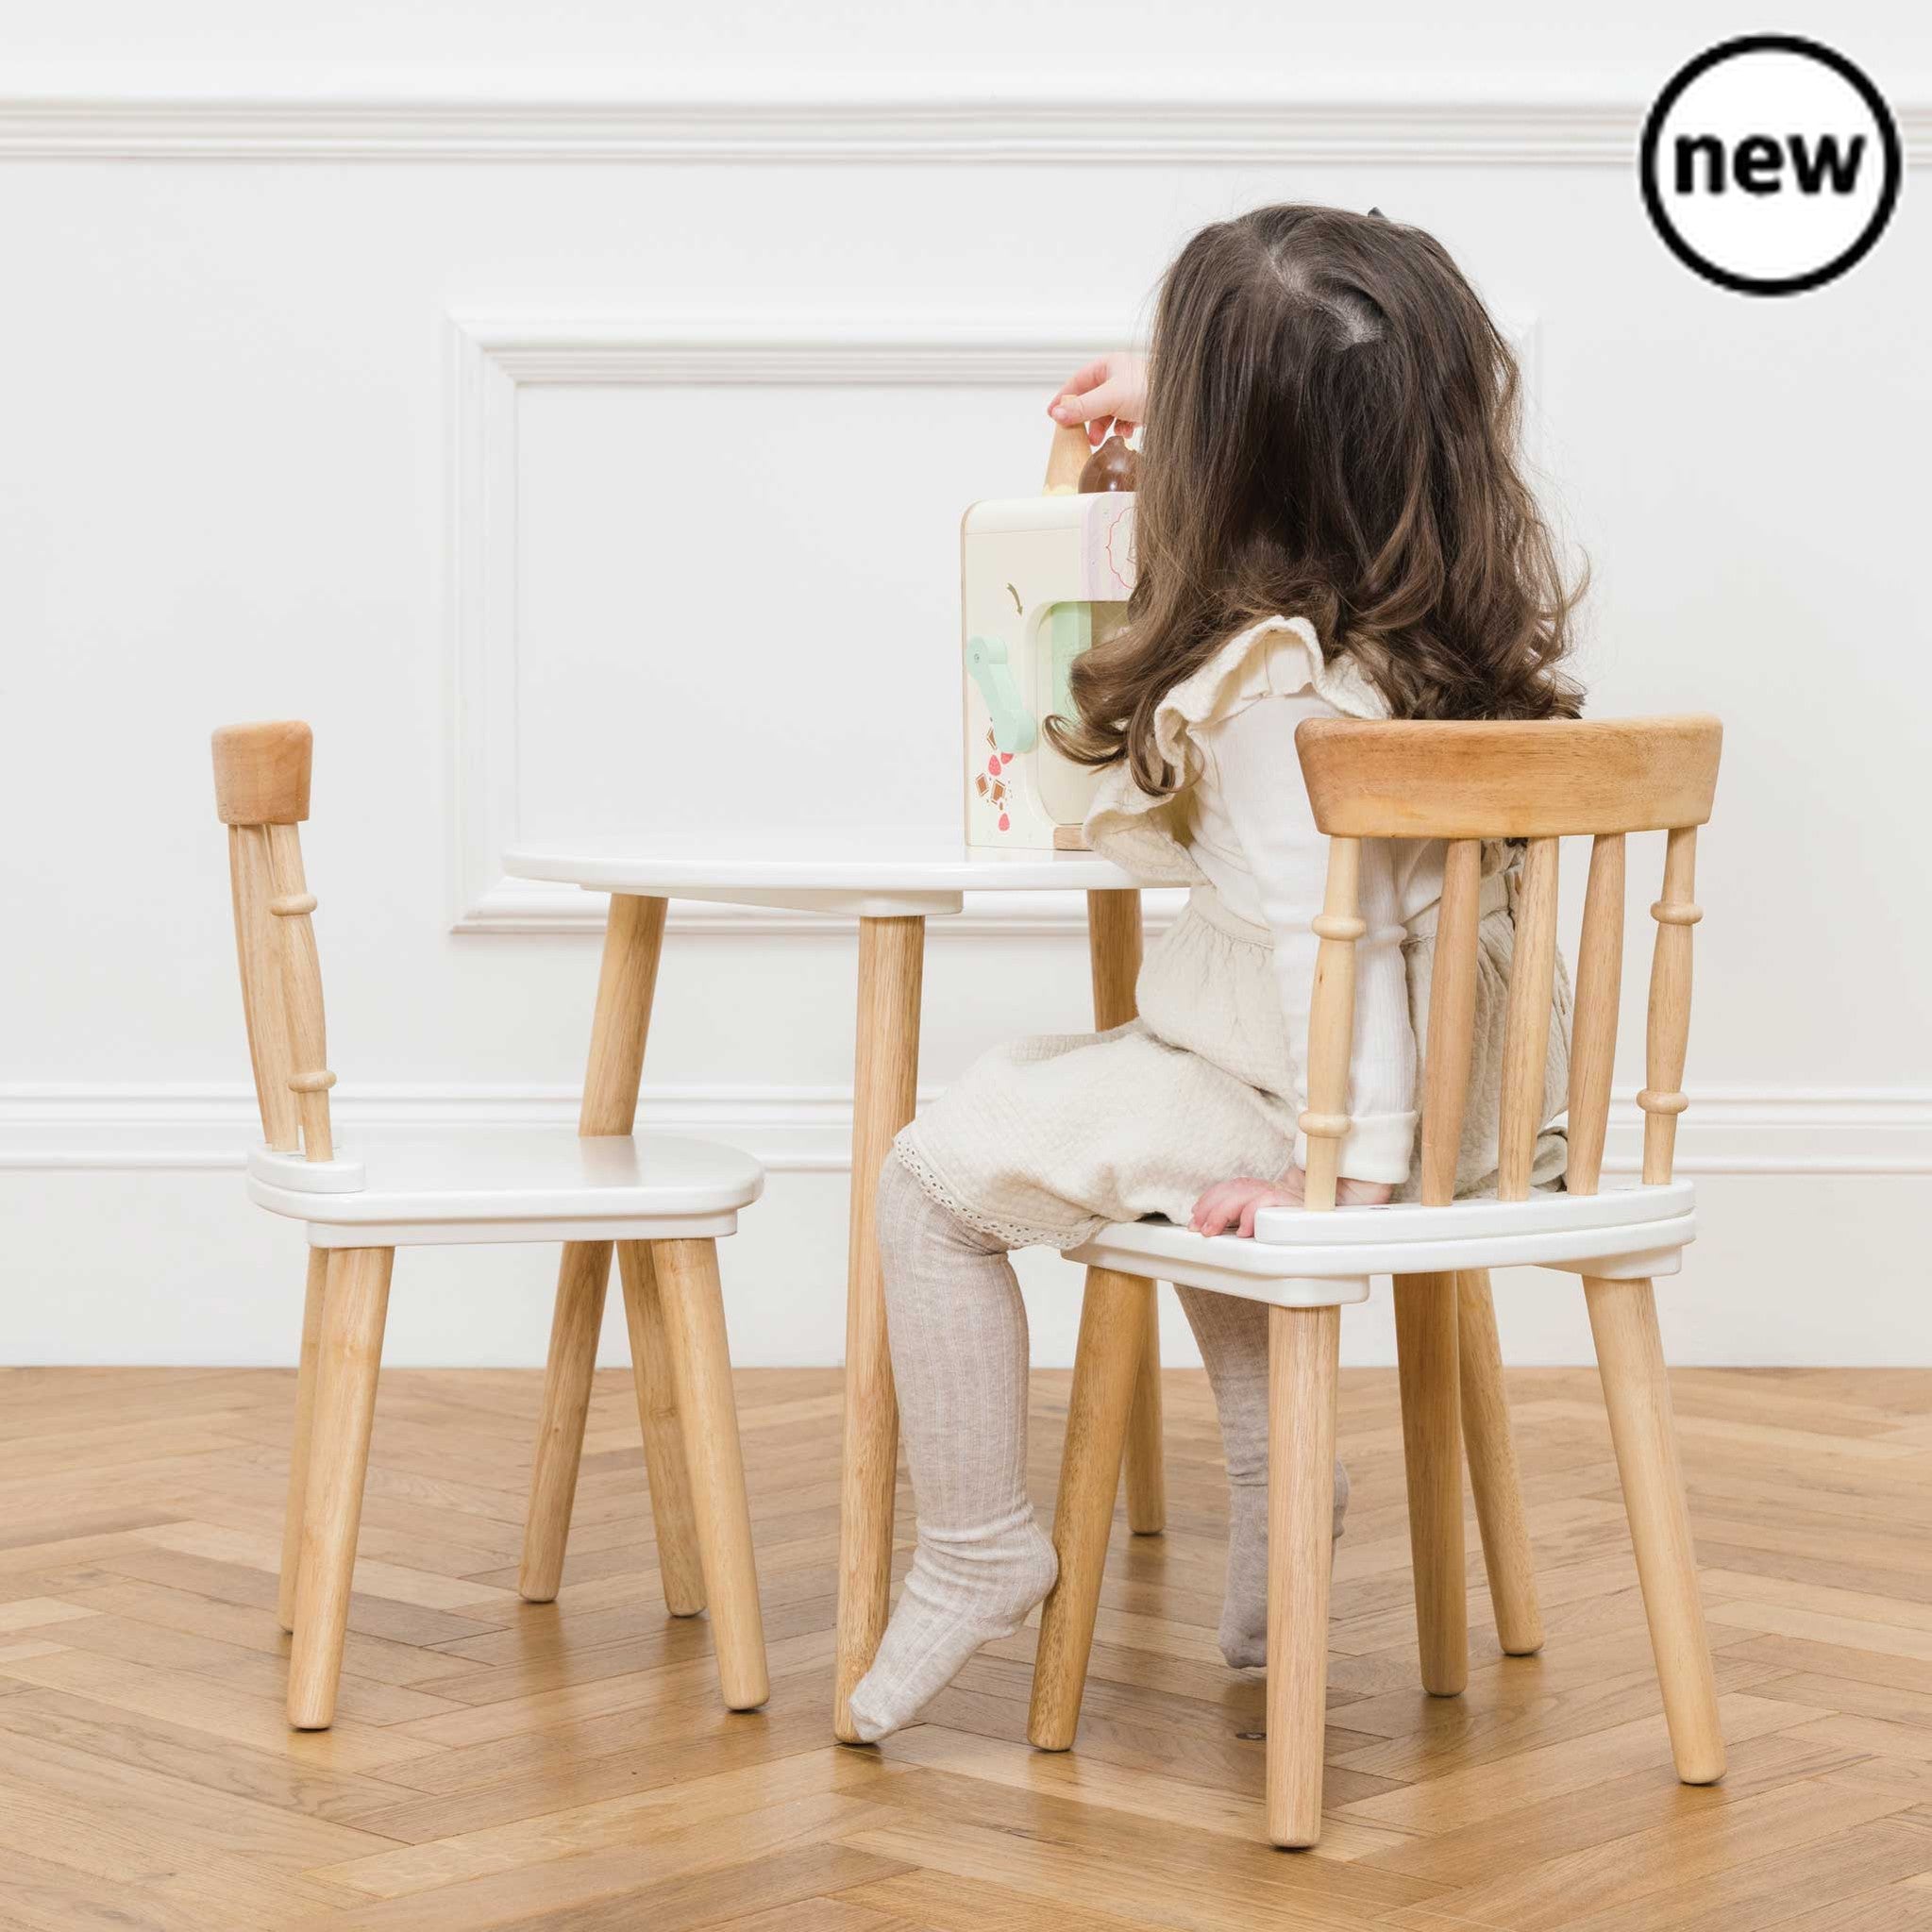 Table and Chairs, Description This charming children's table and chairs set makes a great addition to your littles ones room or playroom. The perfect spot for crafting, eating, reading and role play fun adventures! This multifunctional set is a real must have. With it's timeless appeal and stunning design, it is crafted from solid, sustainable rubberwood and built to last for a lifetime of play. Finished in a combination of fresh white paint and gorgeous exposed wood, it makes a lovely heirloom gift to be t